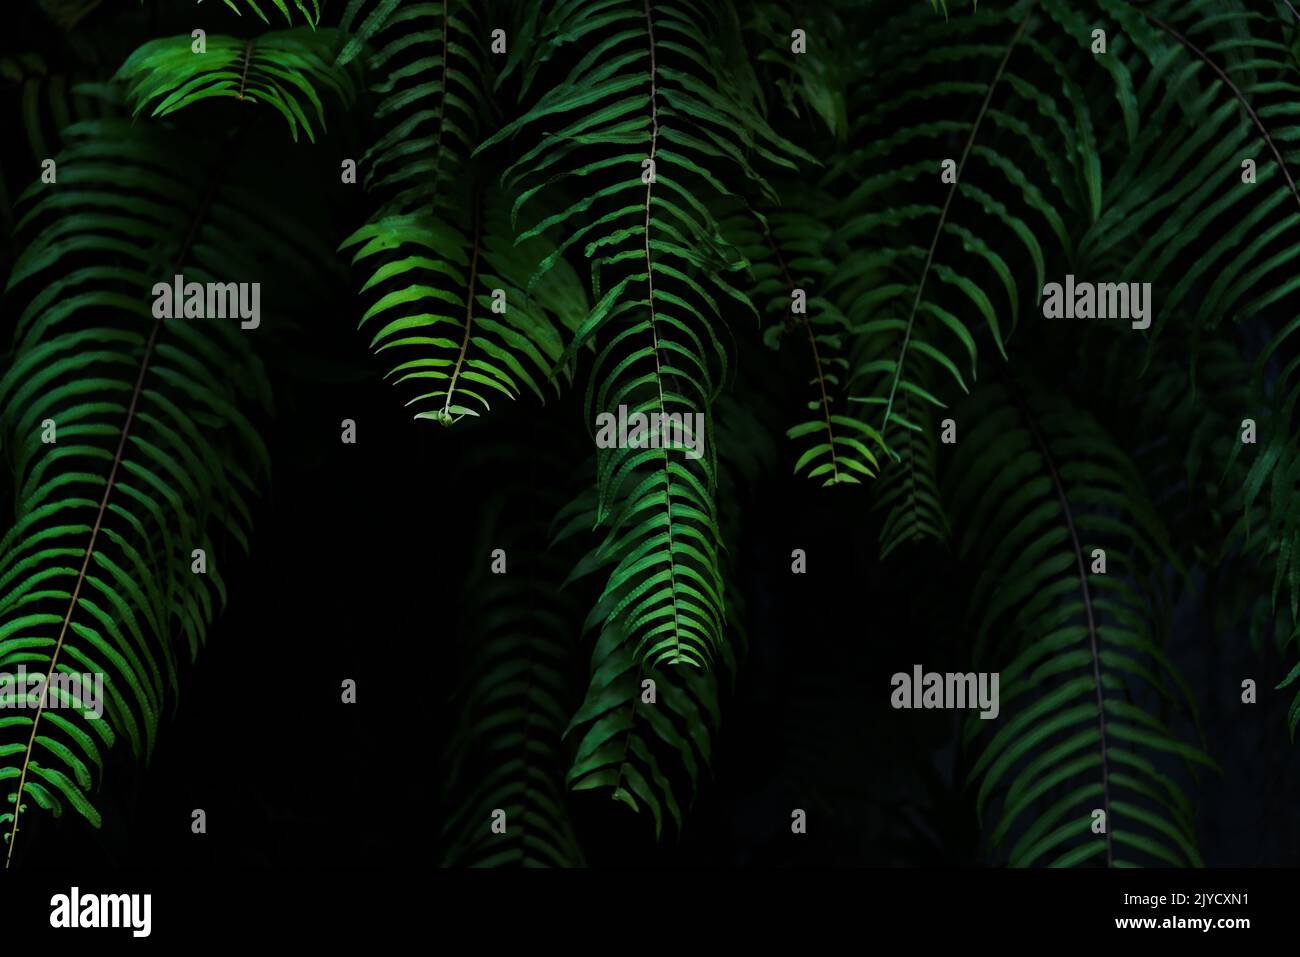 Green fern leaves with dark background Stock Photo